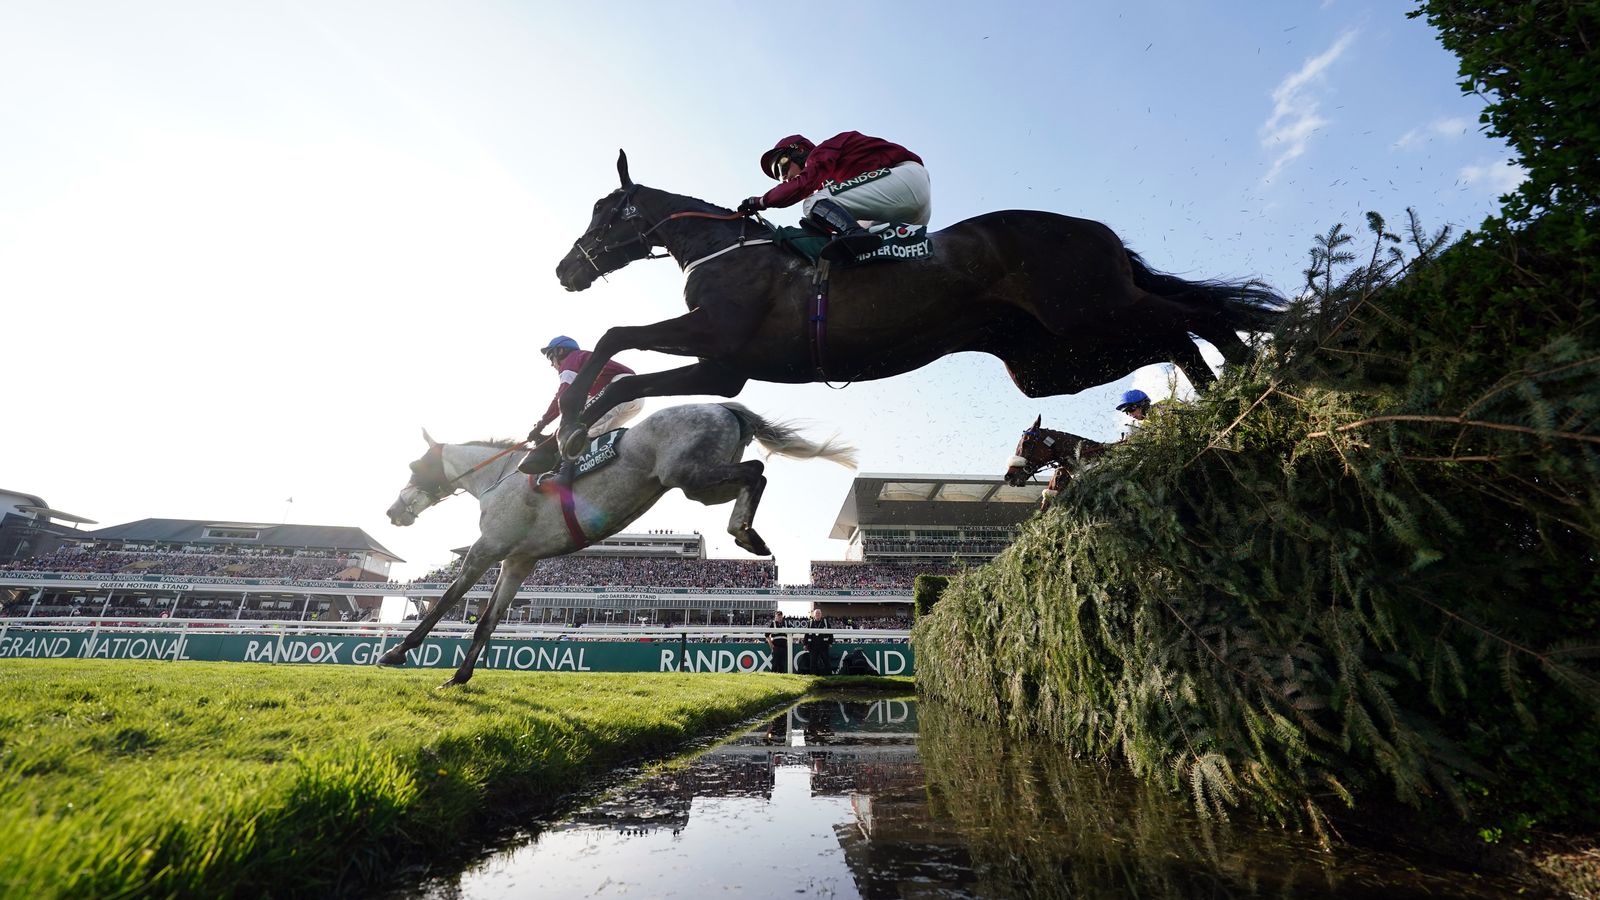 Grand National: Renewed safety fears over race - but organisers insist changes have been made